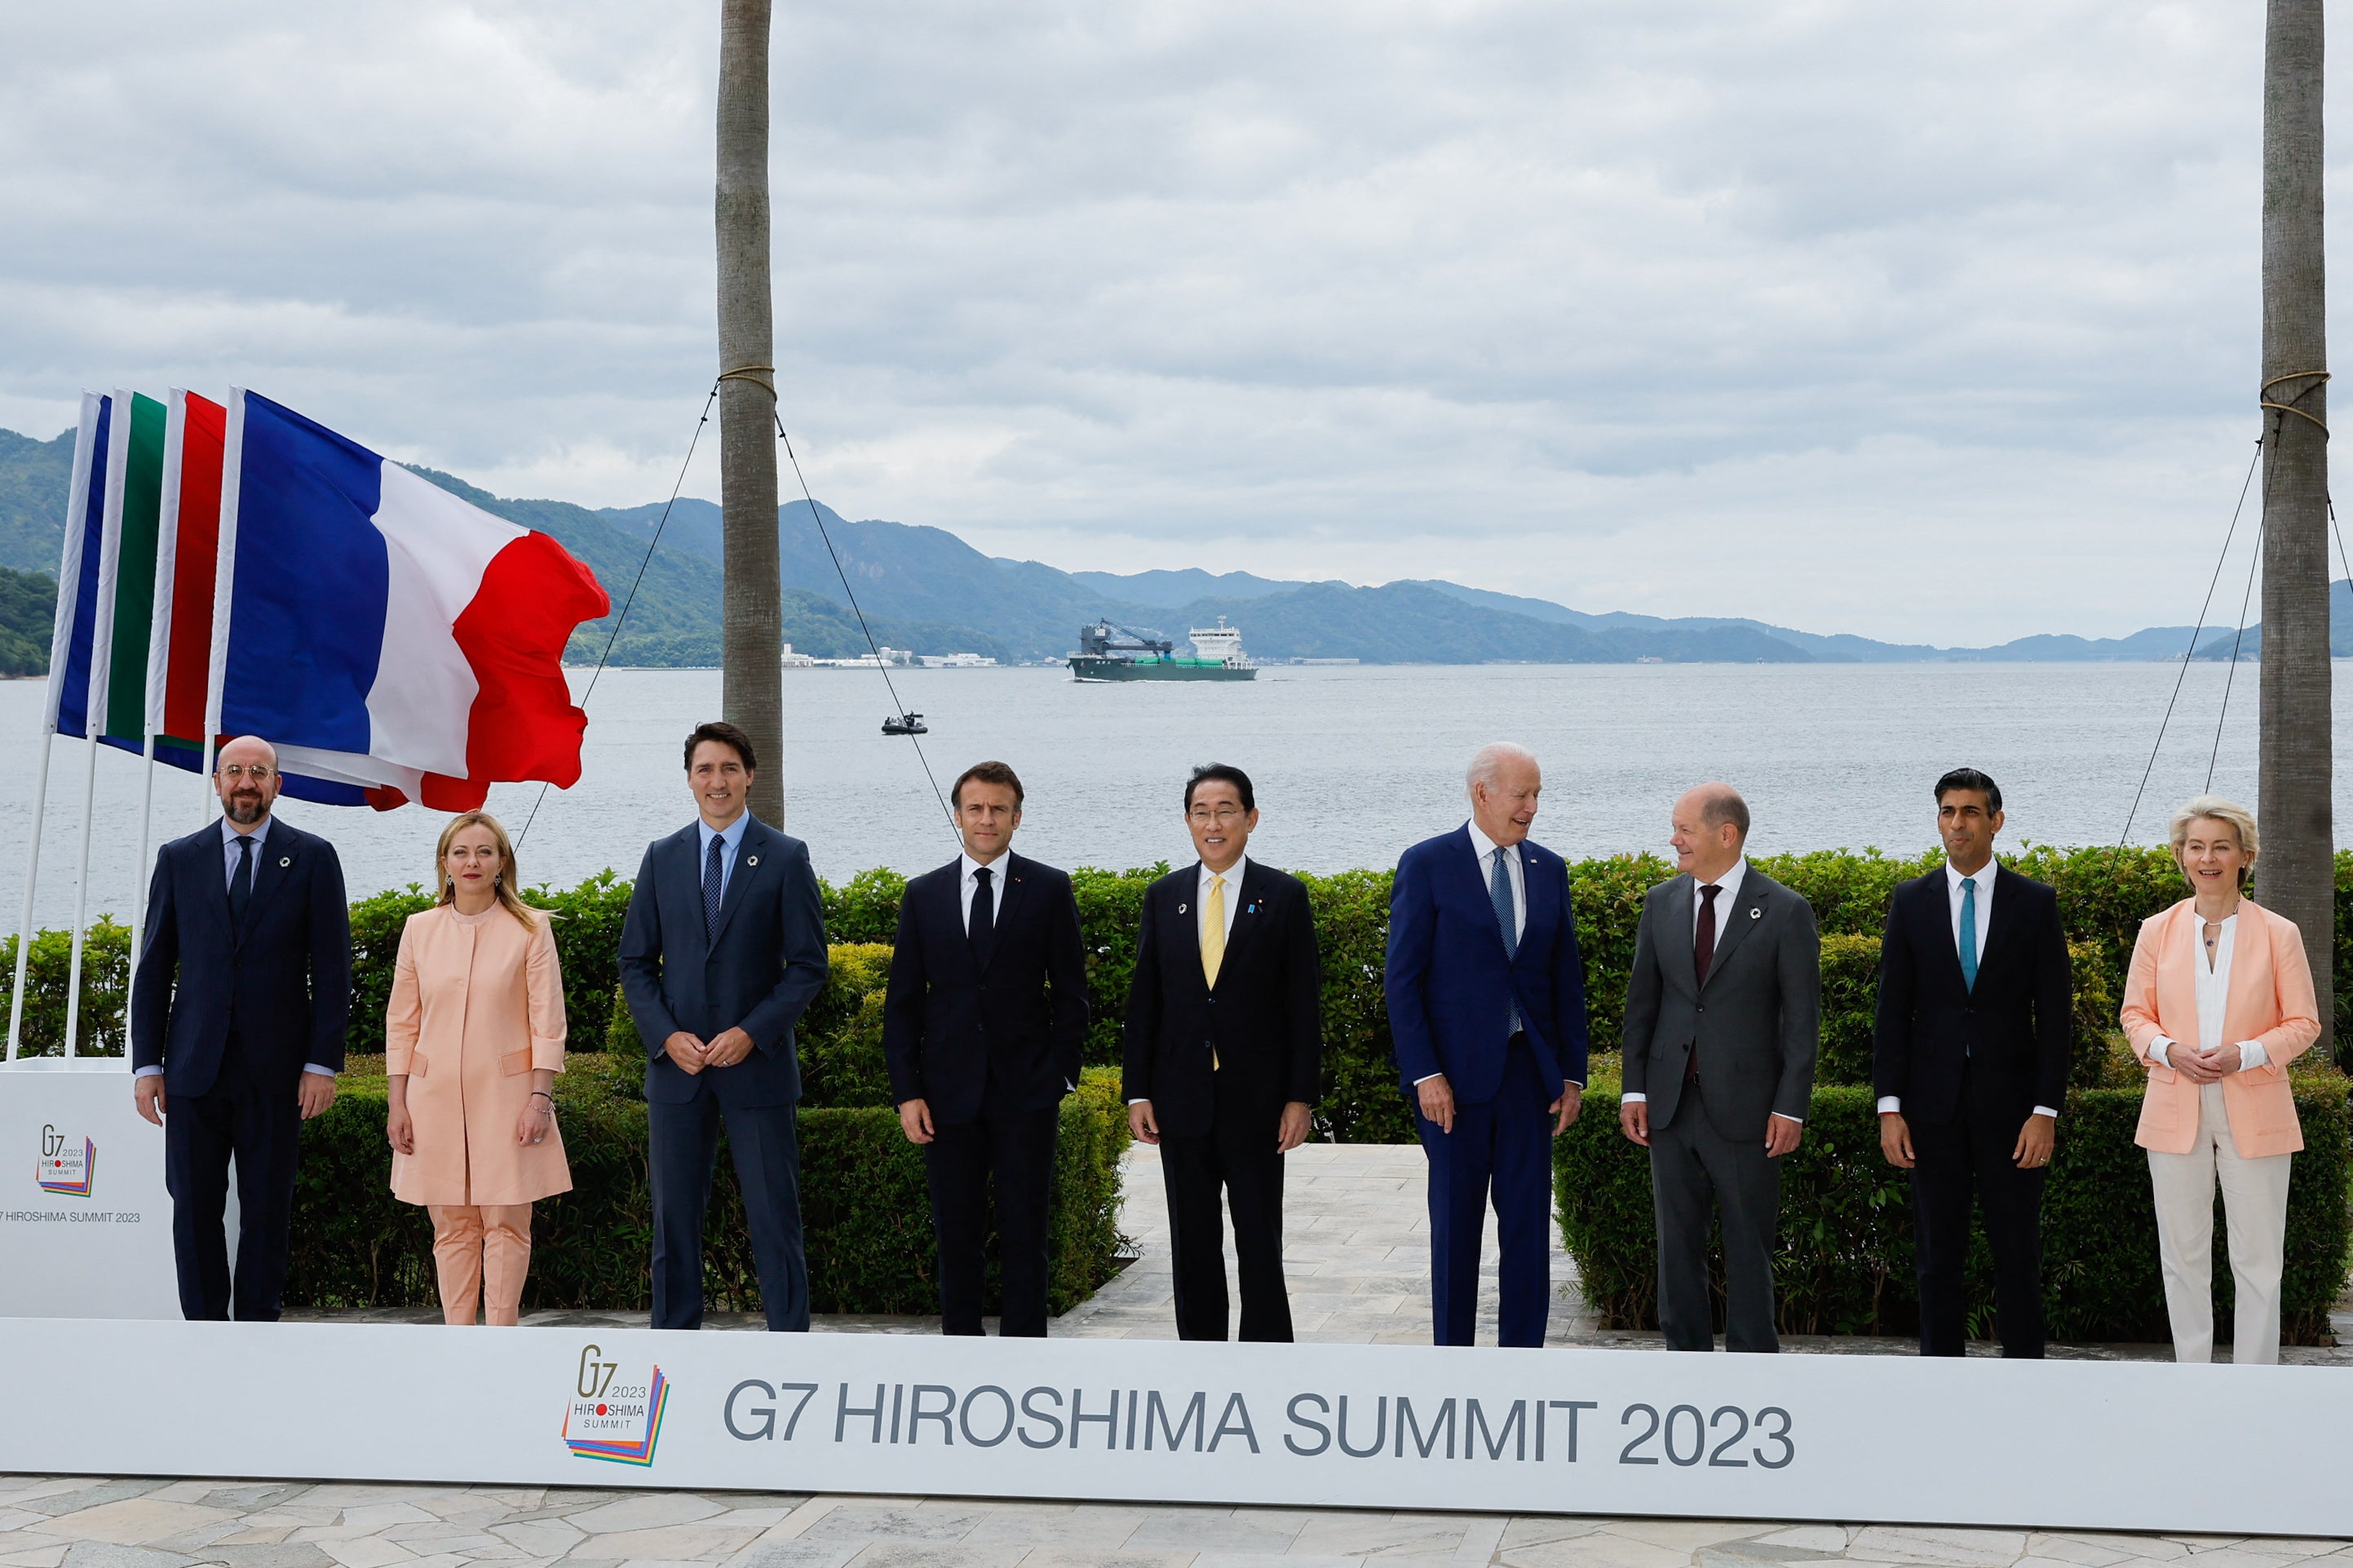 European Council president Charles Michel, Italy’s primer minister Giorgia Meloni, Canada’s prime minister Justin Trudeau, France’s president Emmanuel Macron, Japan’s prime minister Fumio Kishida, US president Joe Biden, German chancellor Olaf Scholz, Britain’s prime minister Rishi Sunak and European Commission president Ursula von der Leyen participate in a family photo with G7 leaders before their working lunch meeting on economic security at the Grand Prince Hotel in Hiroshima